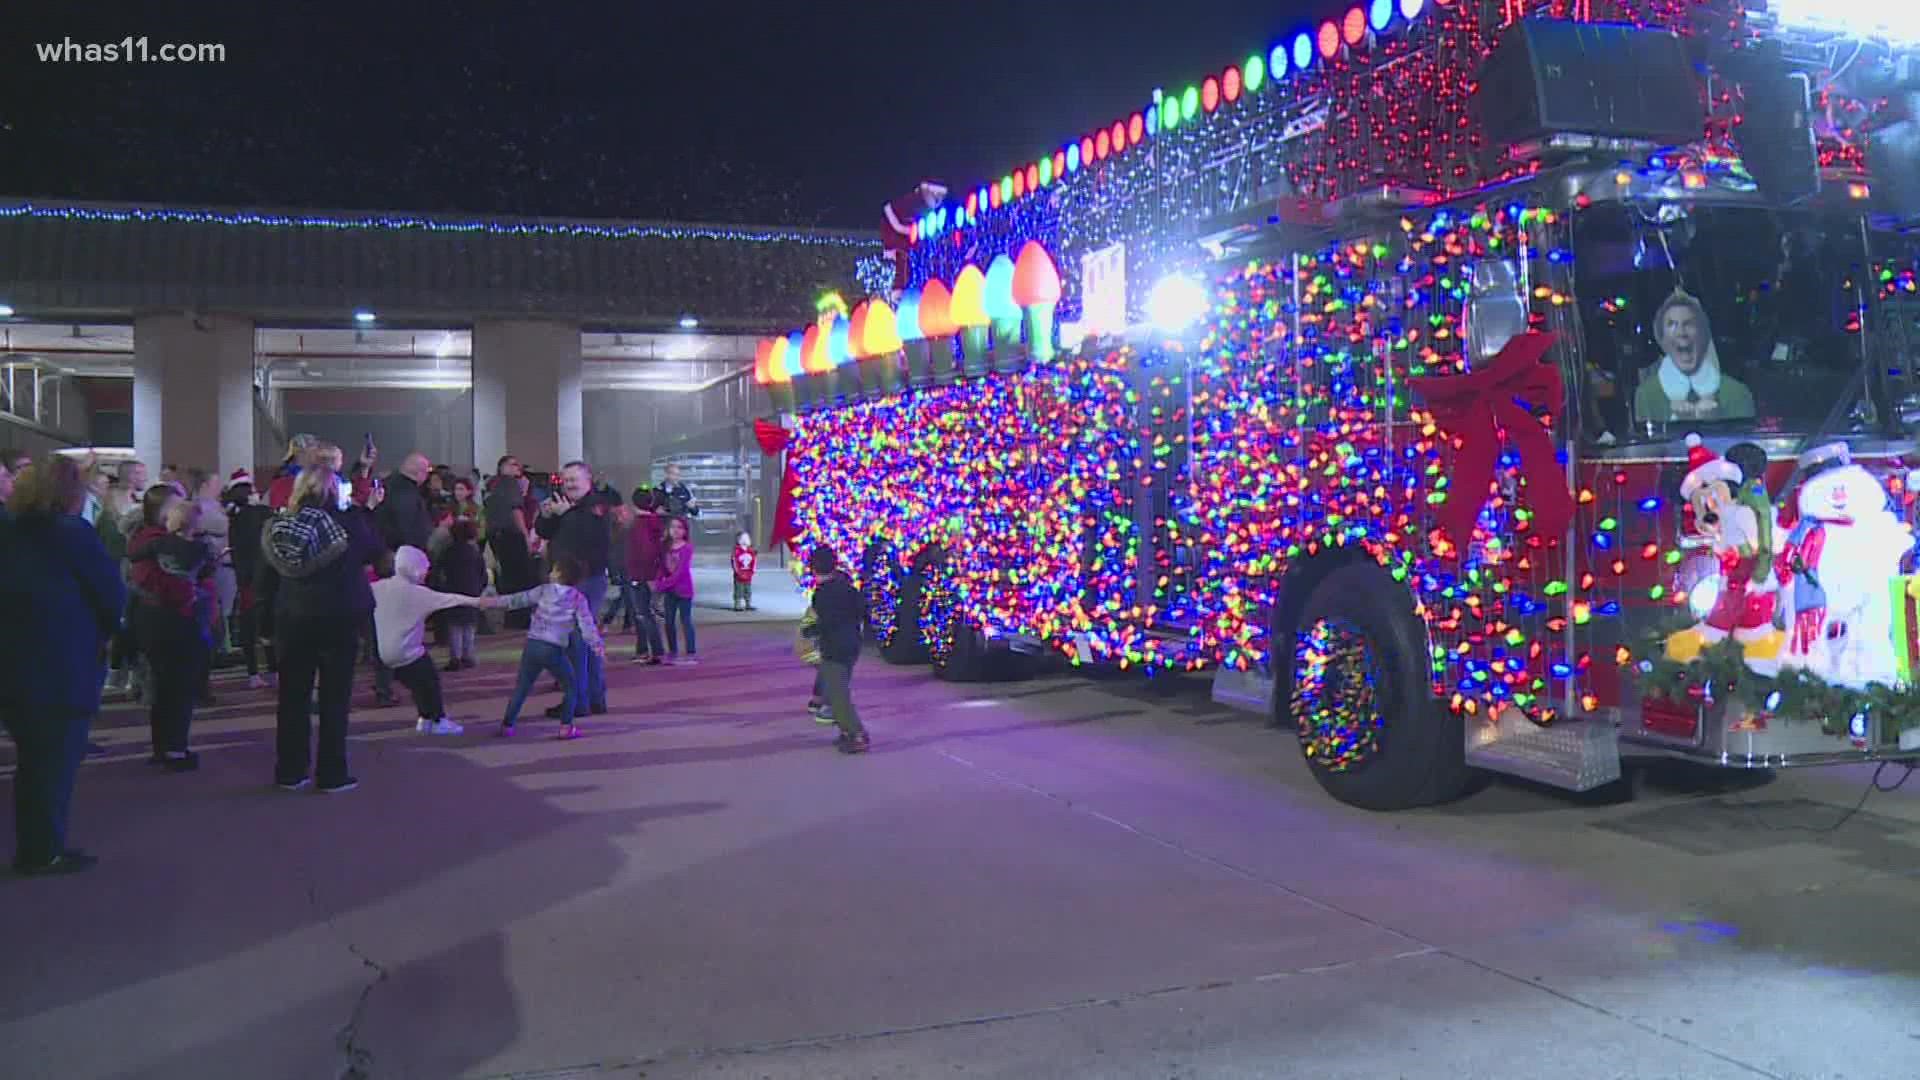 It's become a holiday tradition in Zoneton, and now the beloved Santa Truck is celebrating its 35th year.